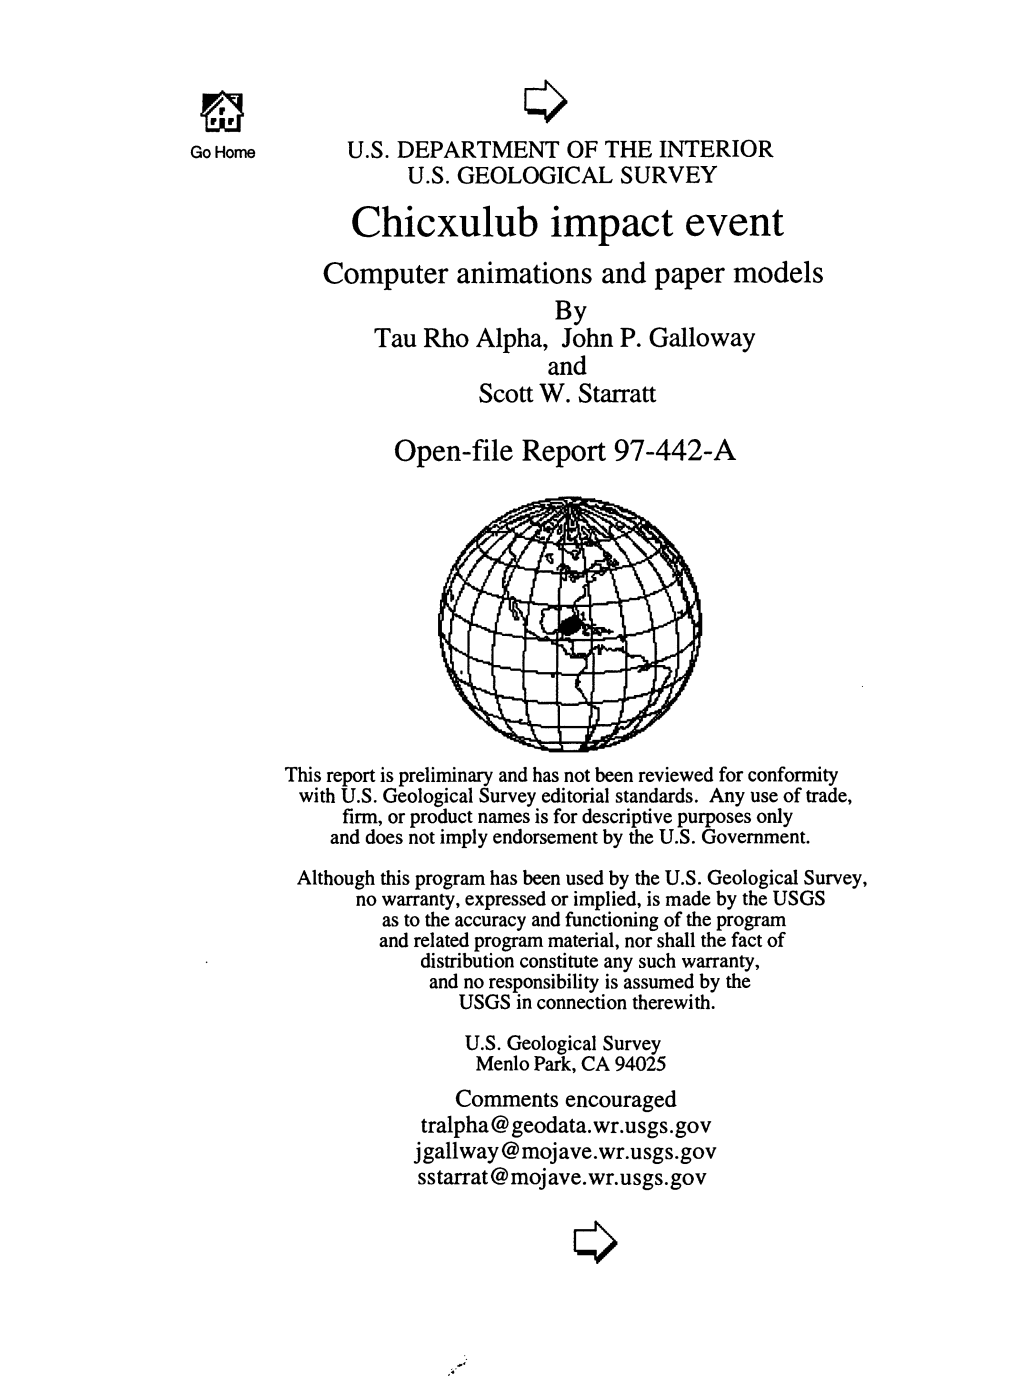 Chicxulub Impact Event Computer Animations and Paper Models by Tau Rho Alpha, John P